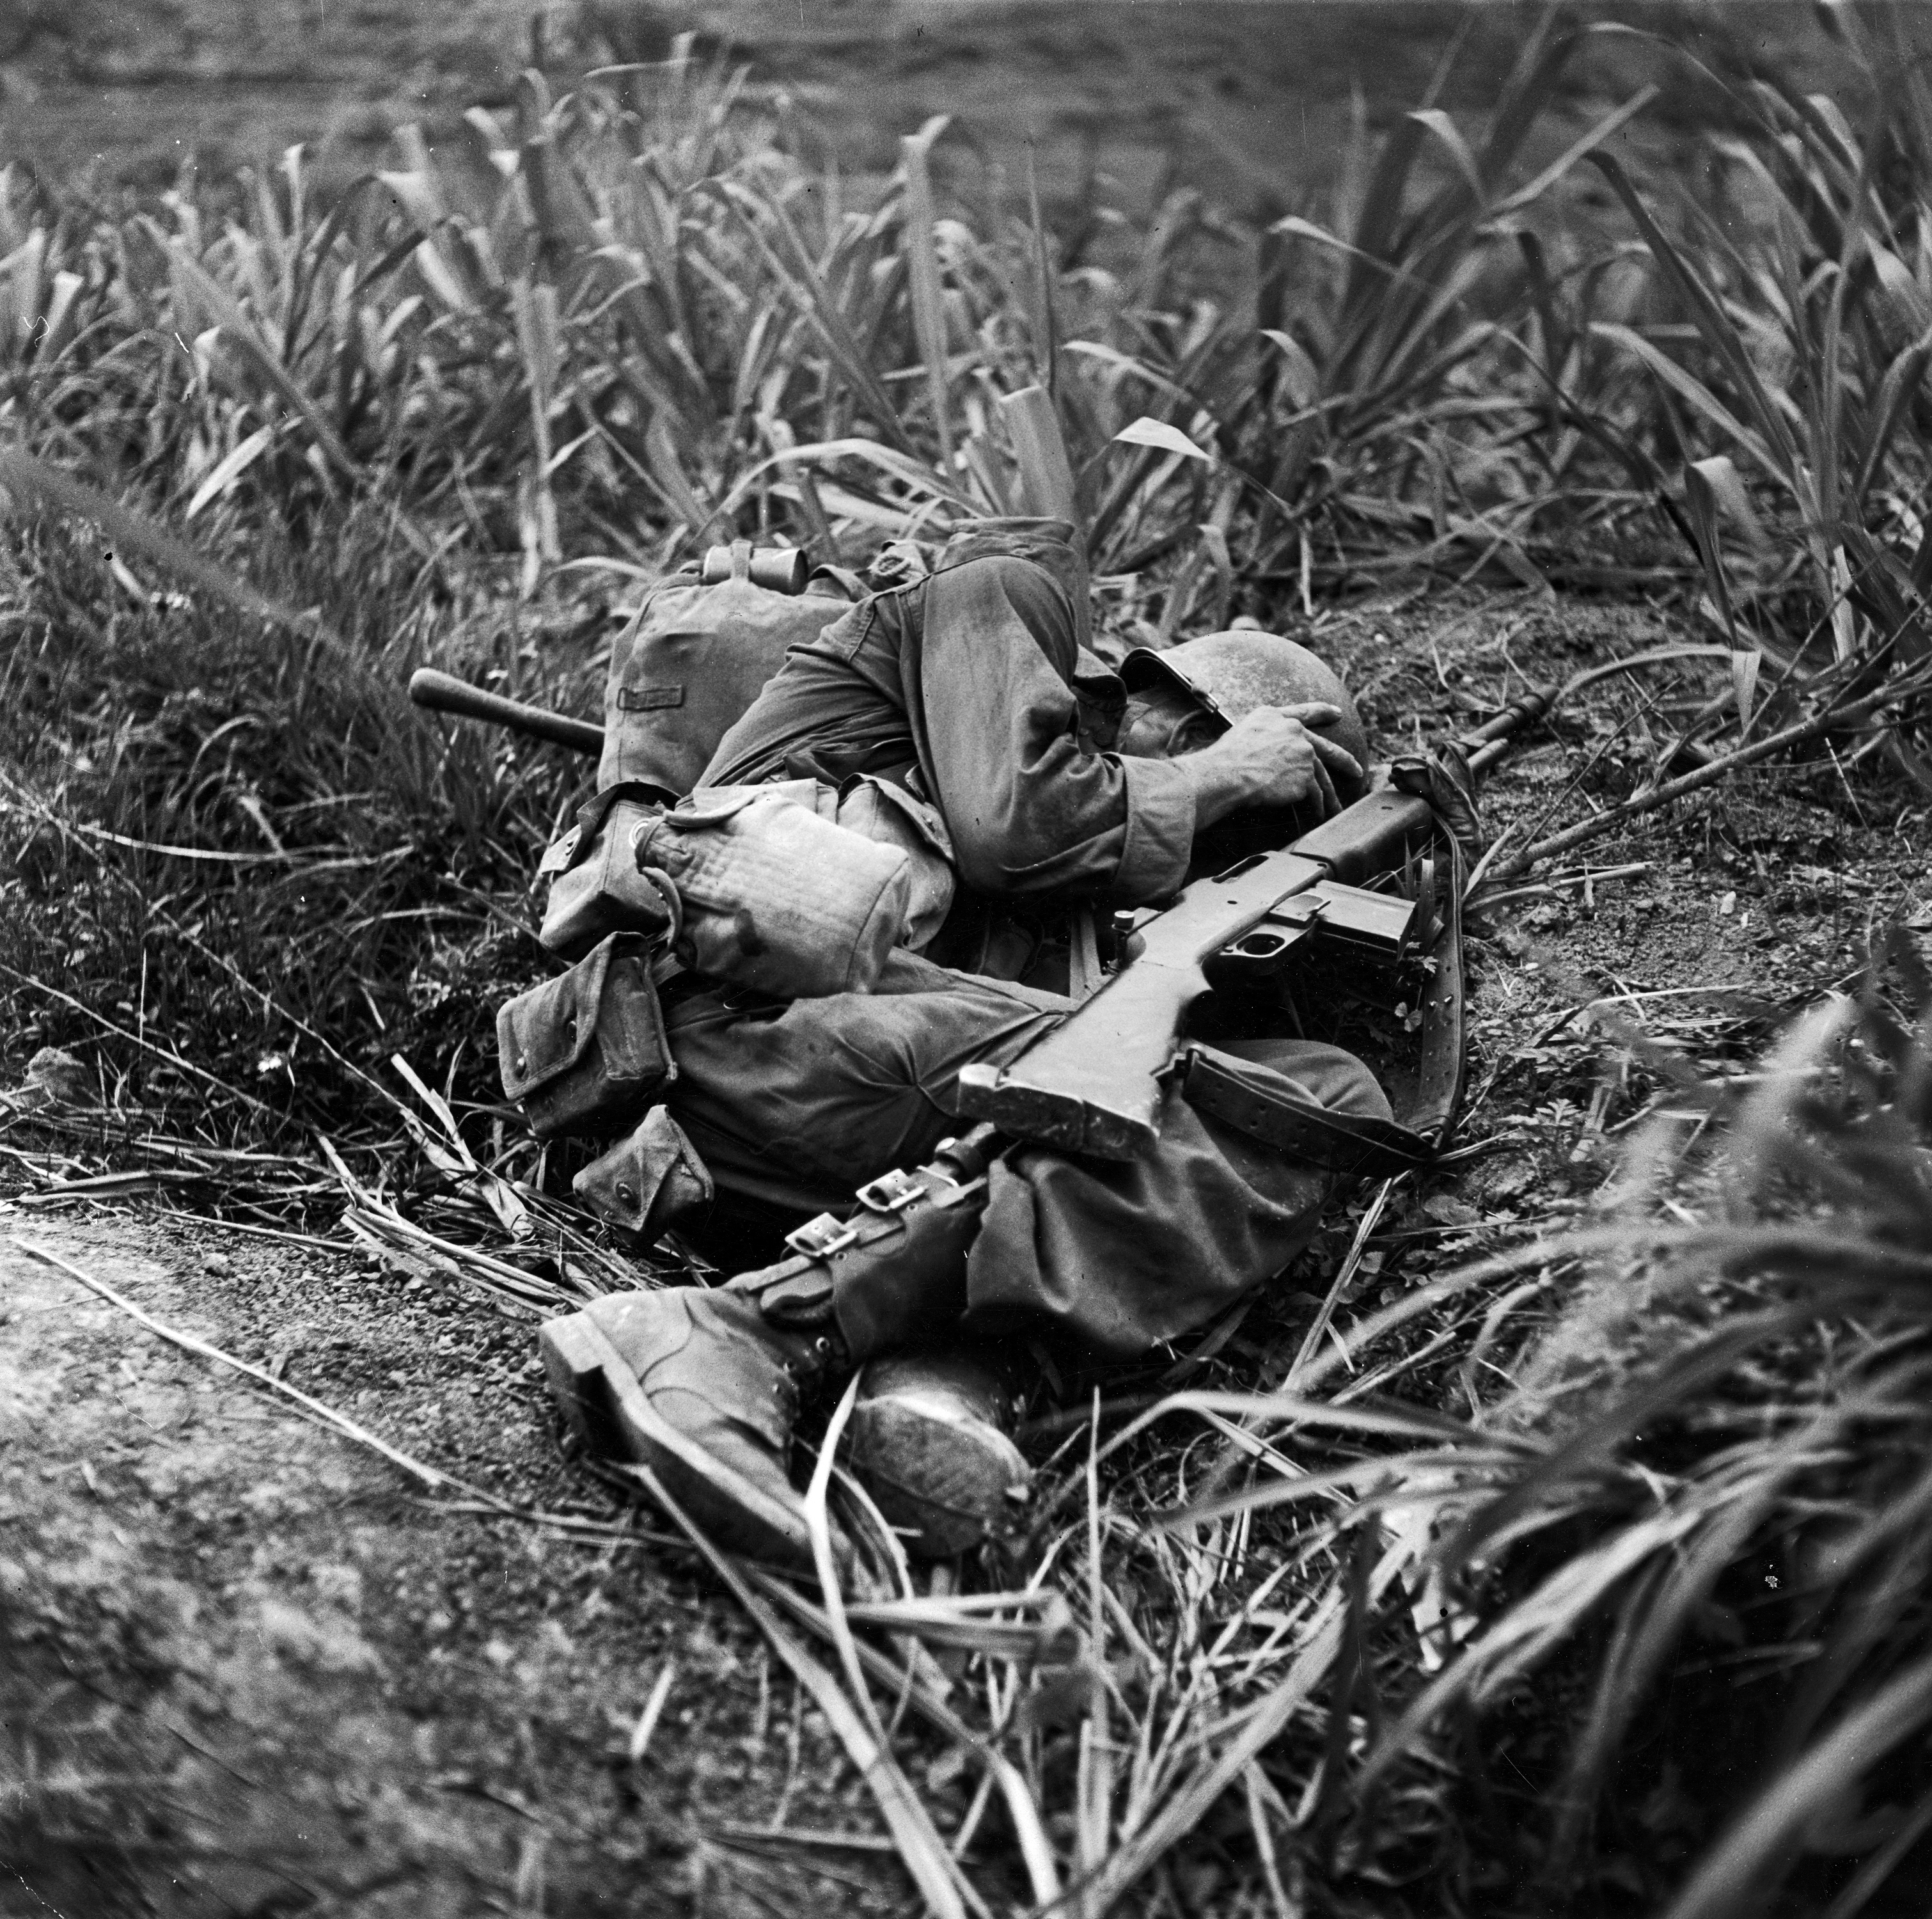 American infantryman Terry Moore takes cover as incoming Japanese artillery fire explodes nearby during the fight to take Okinawa, May 1945. (tedxatlanta.com)